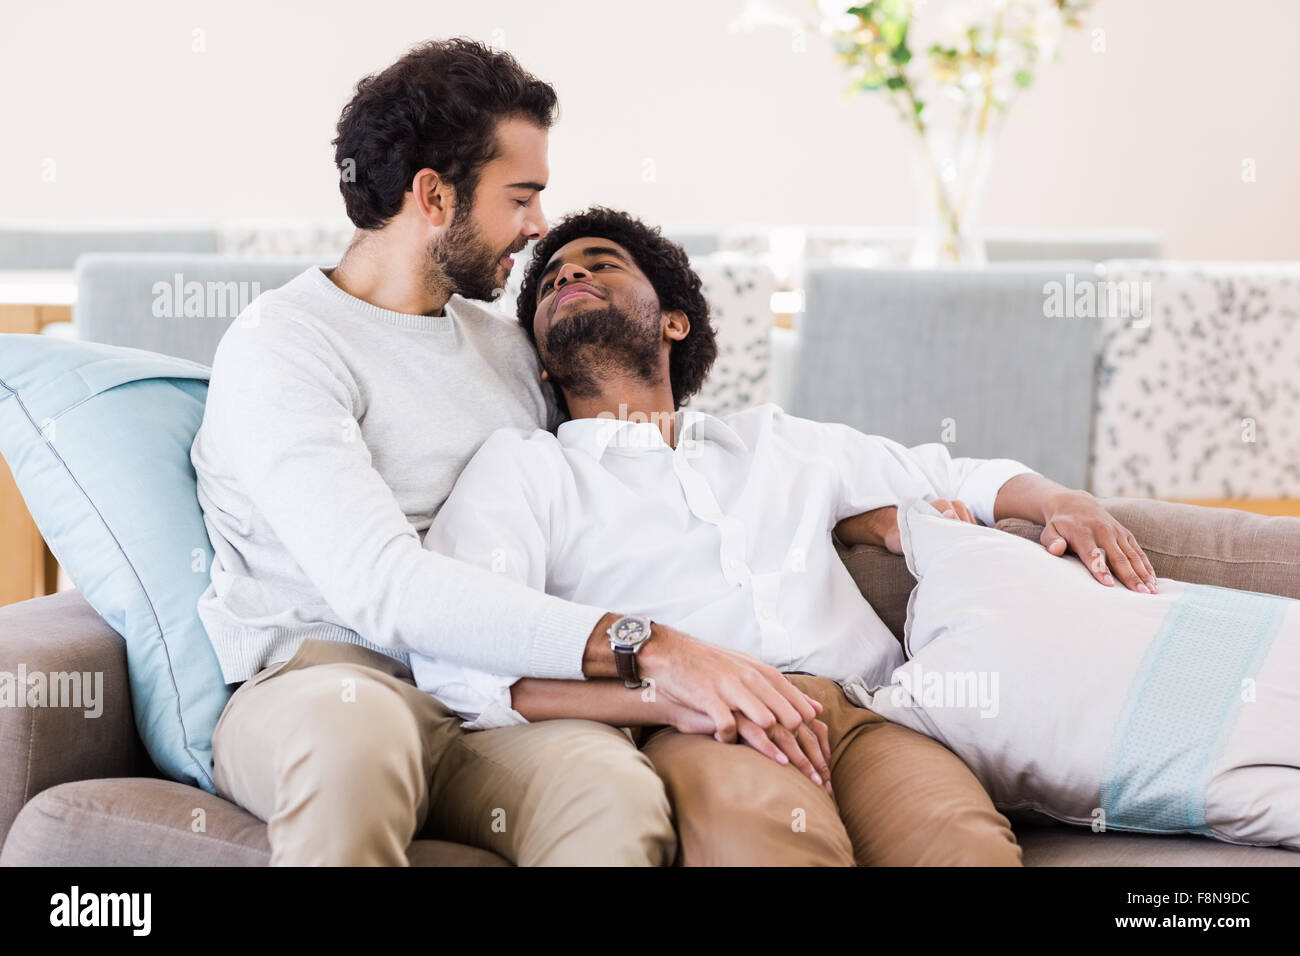 Happy gay couple relaxing on sofa Banque D'Images